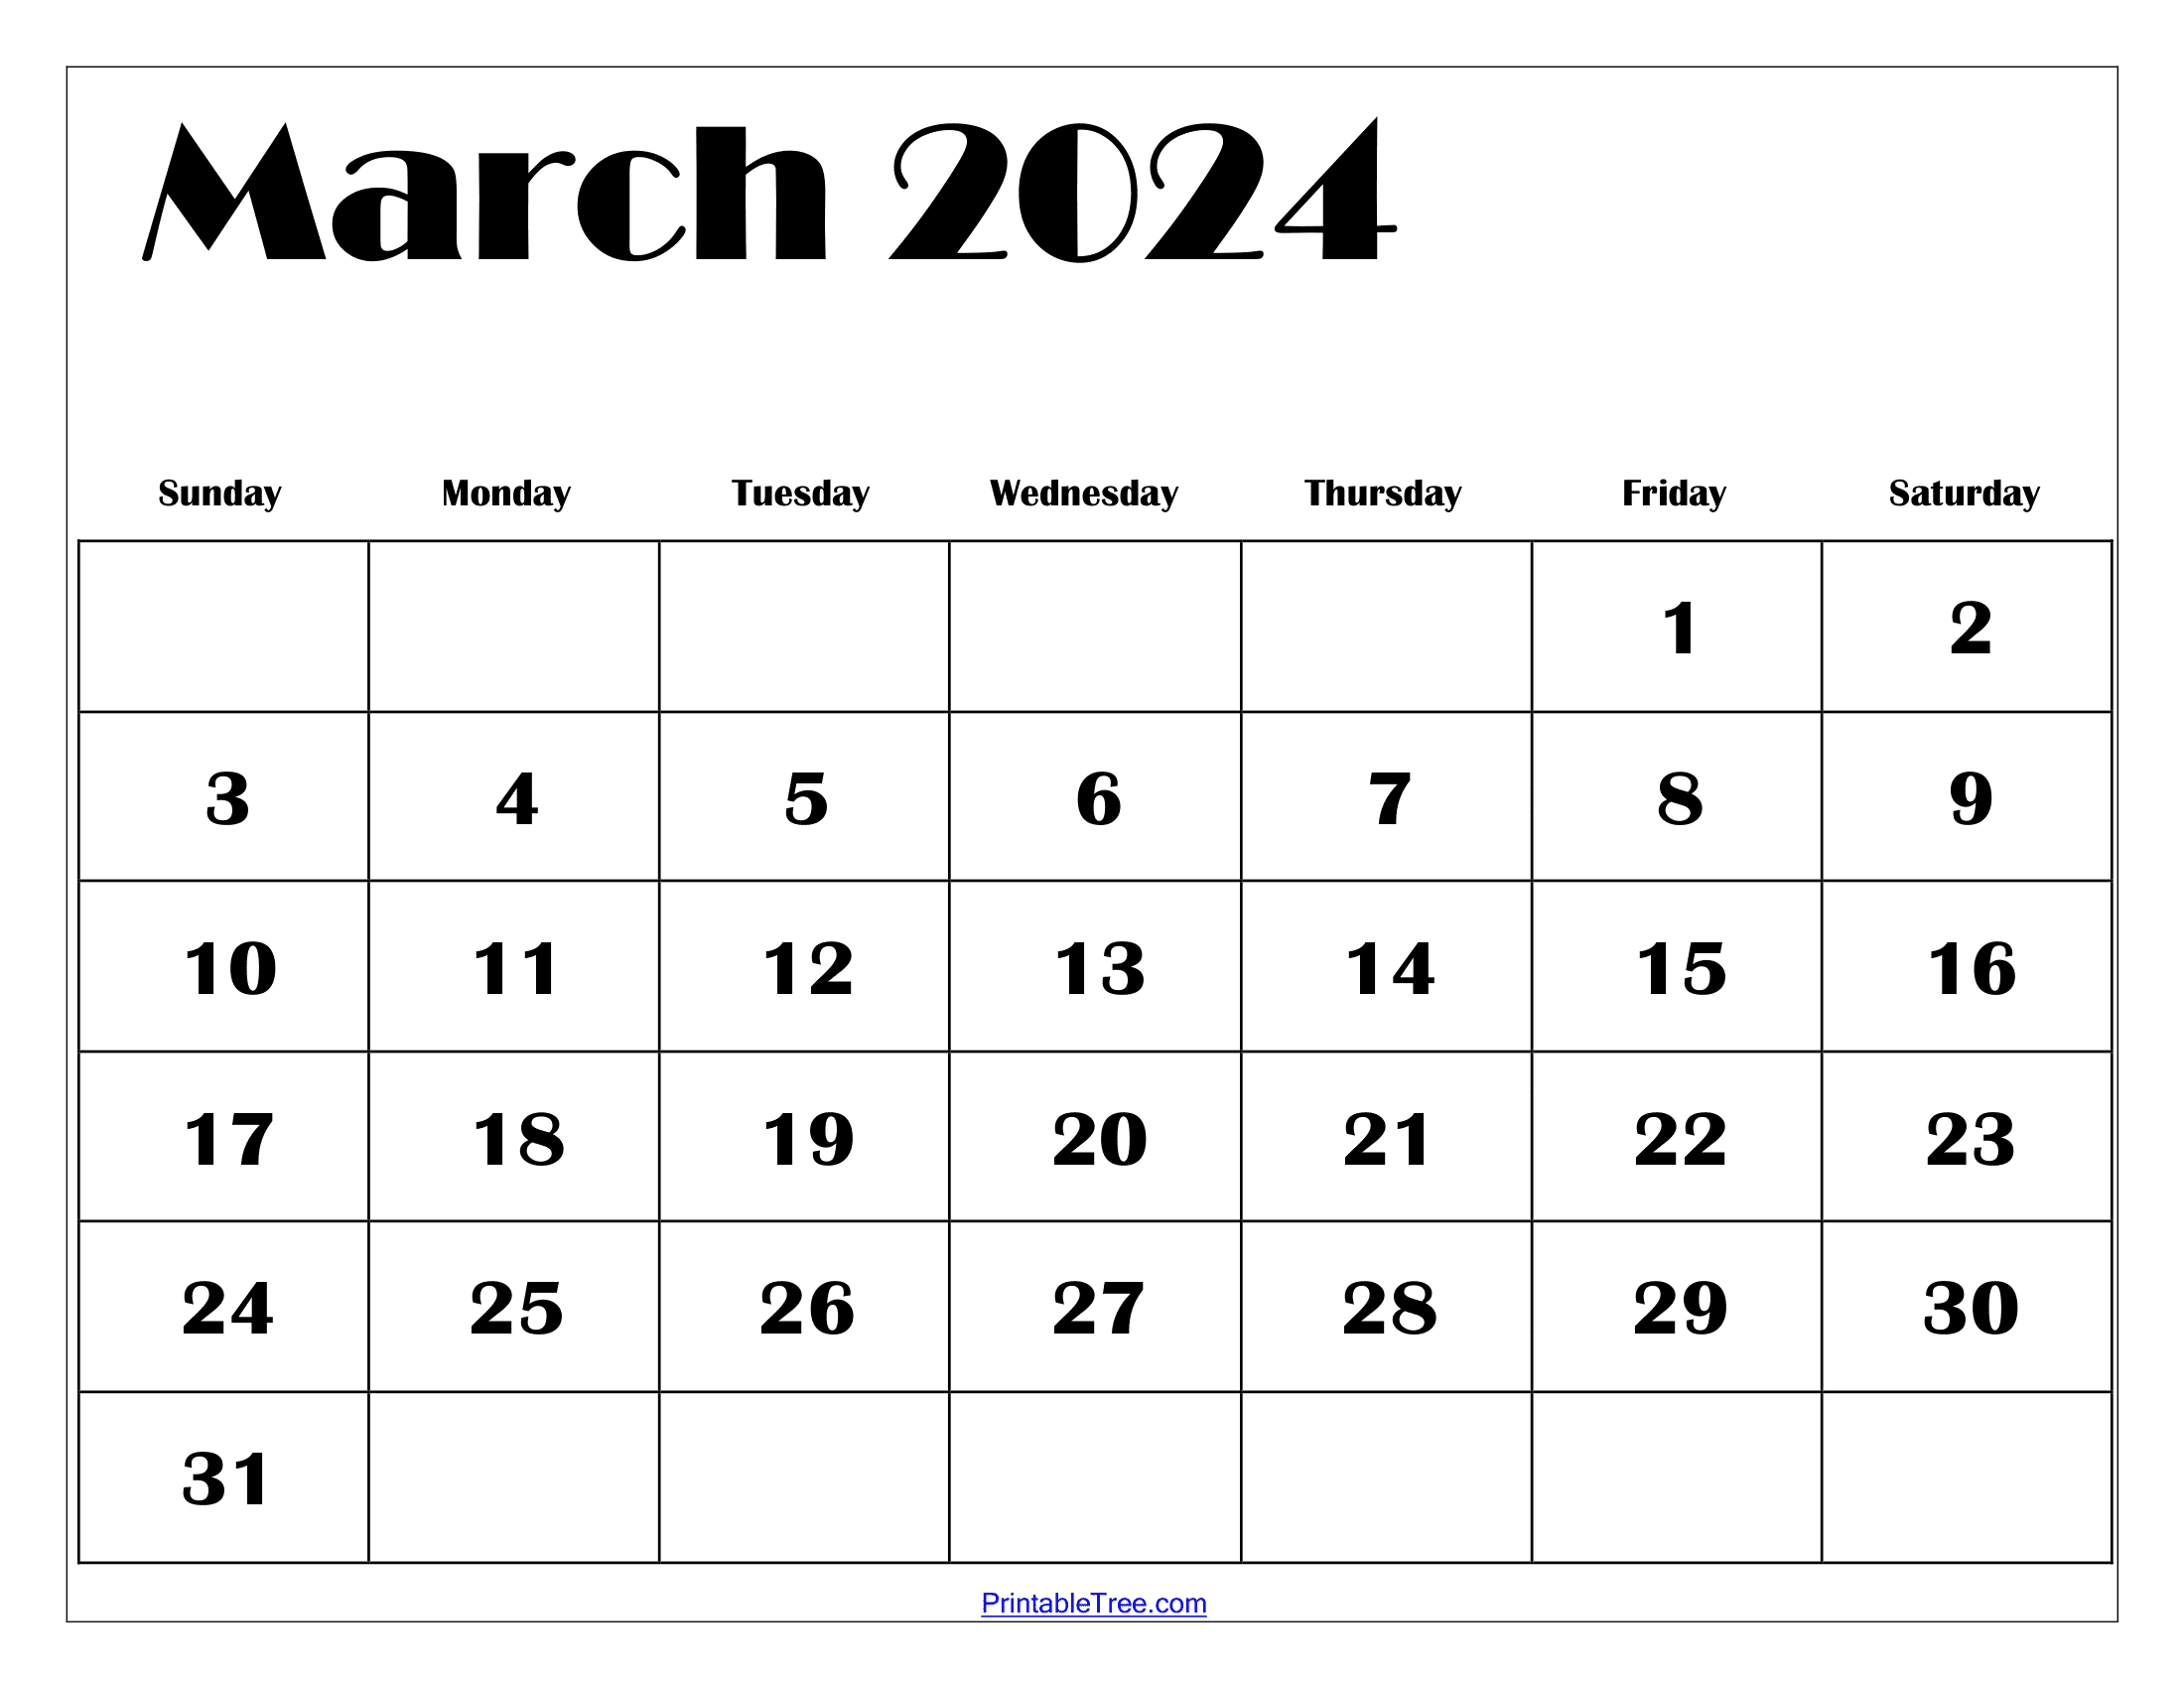 March 2024 Calendar Printable Pdf With Holidays Template Free for Free Printable March Calendar 2024